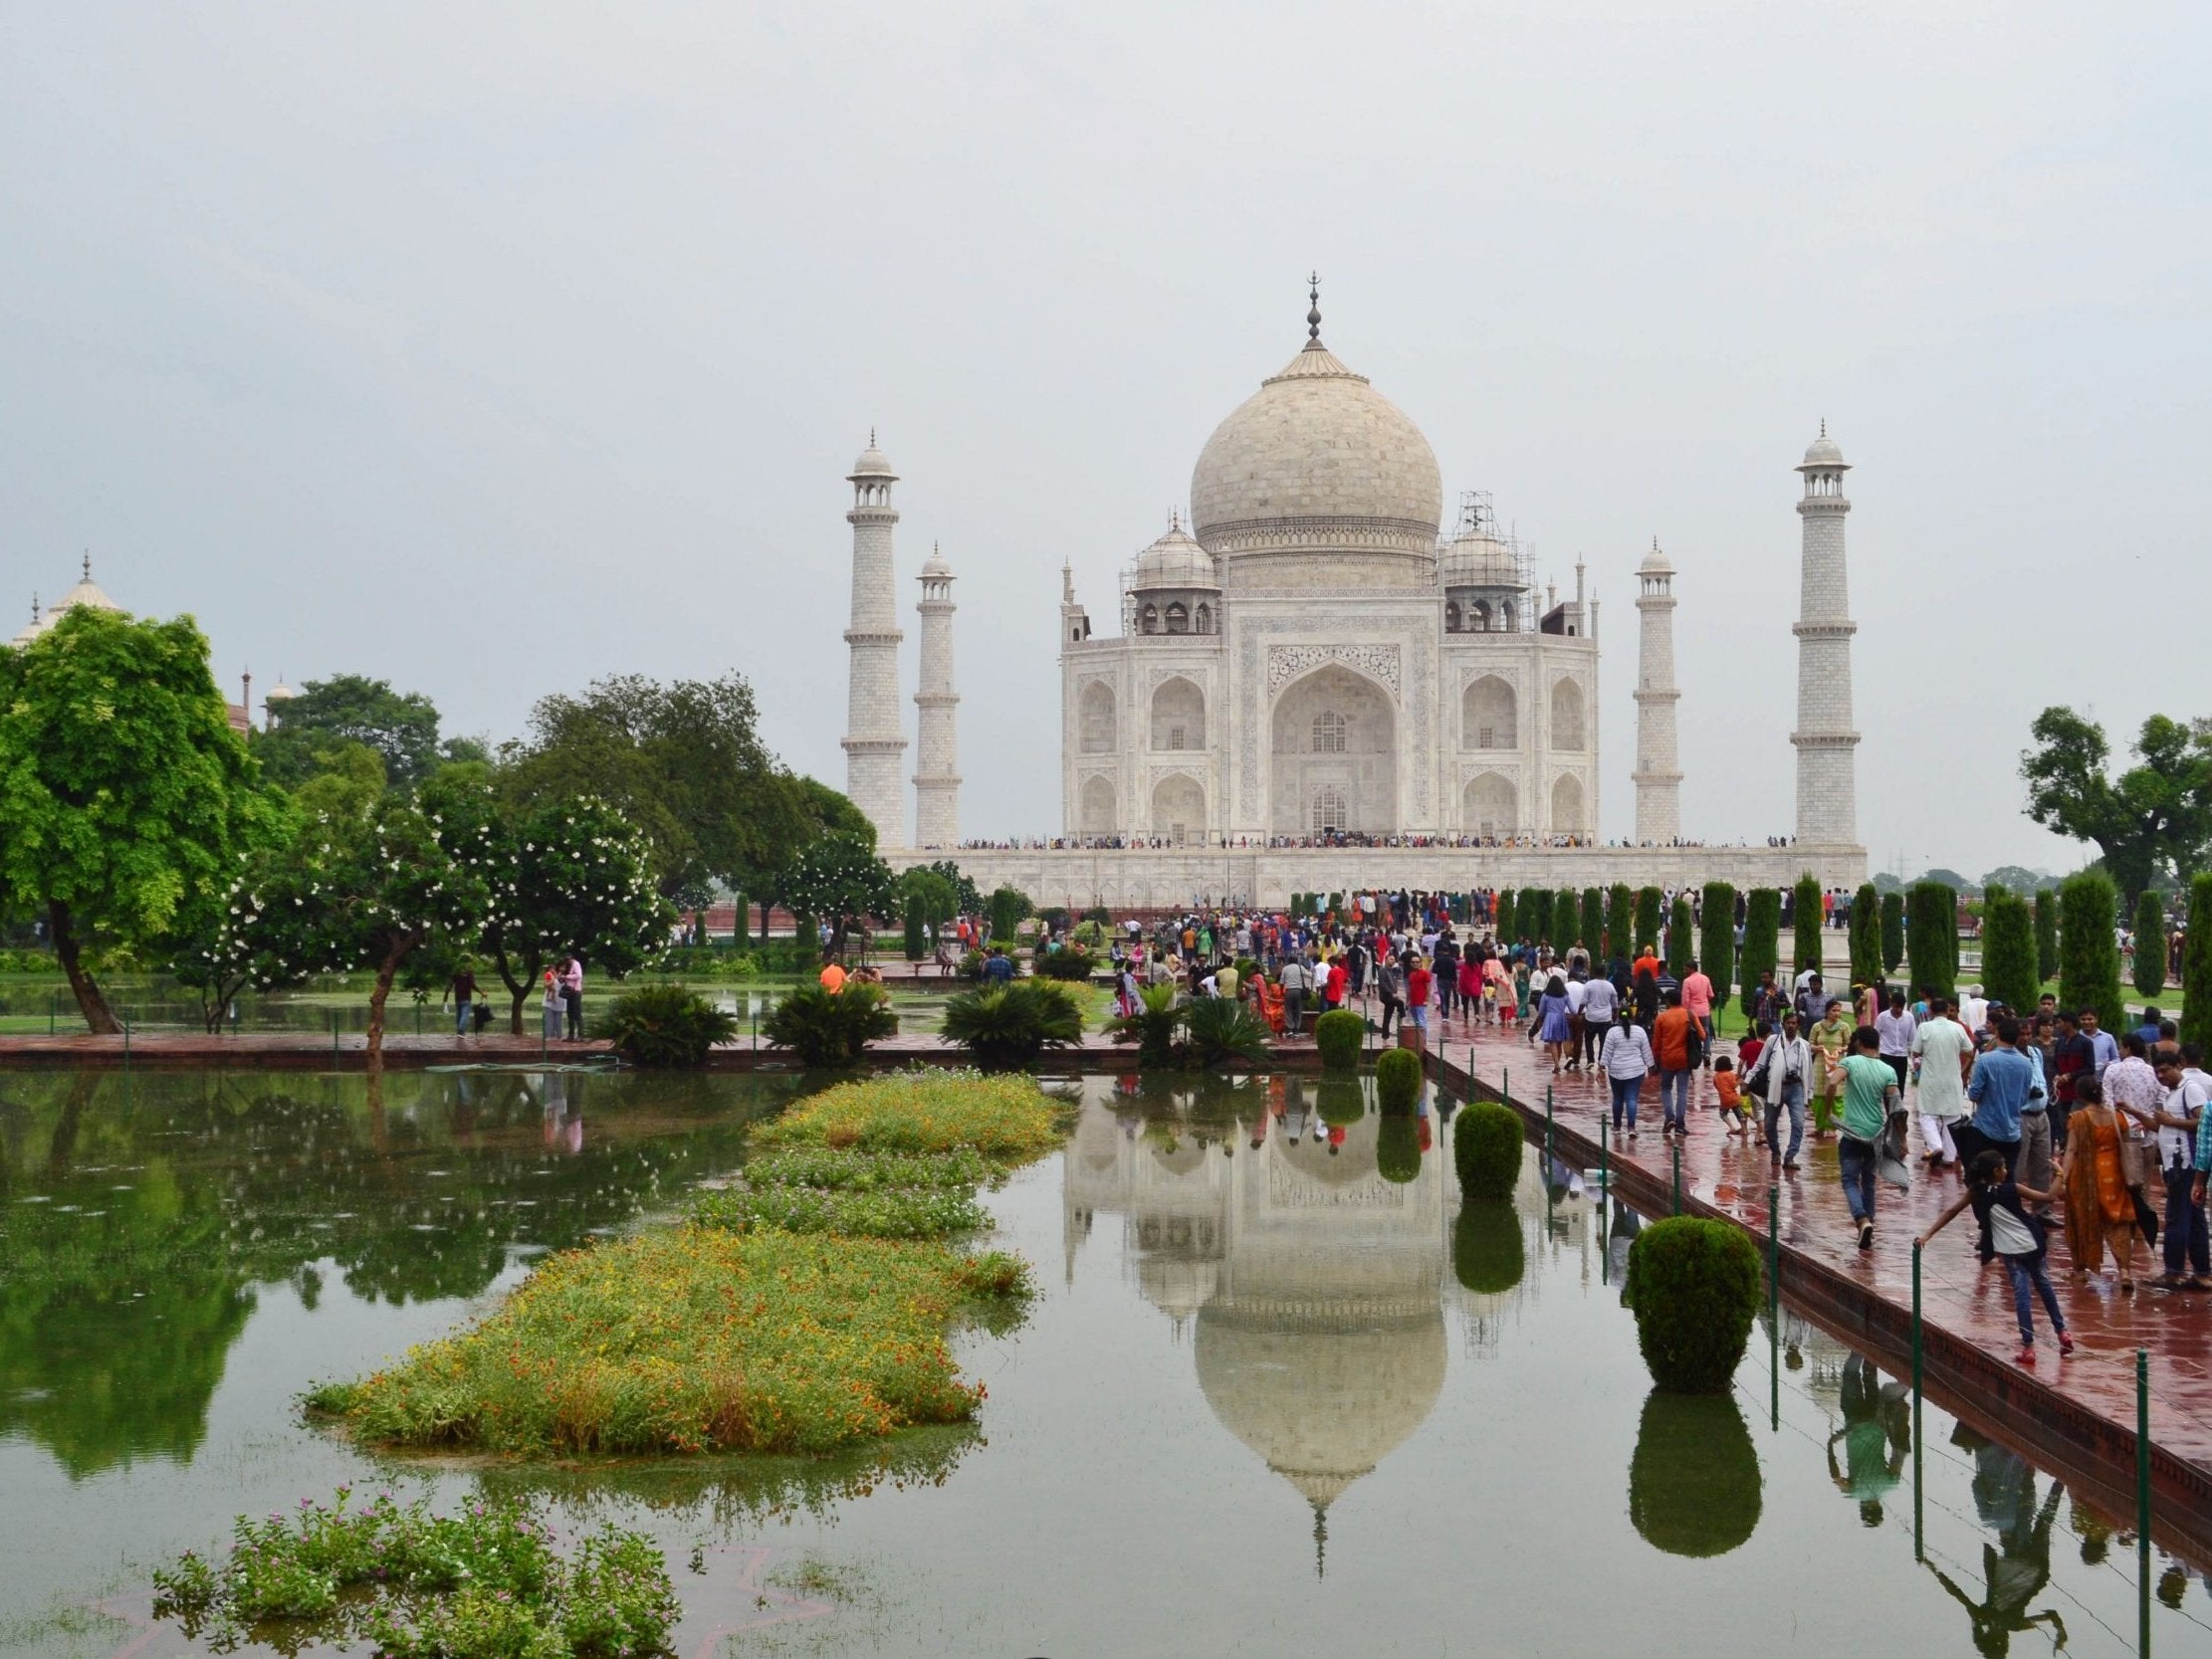 There are lots of sights, such as the Taj Mahal, once you get to India